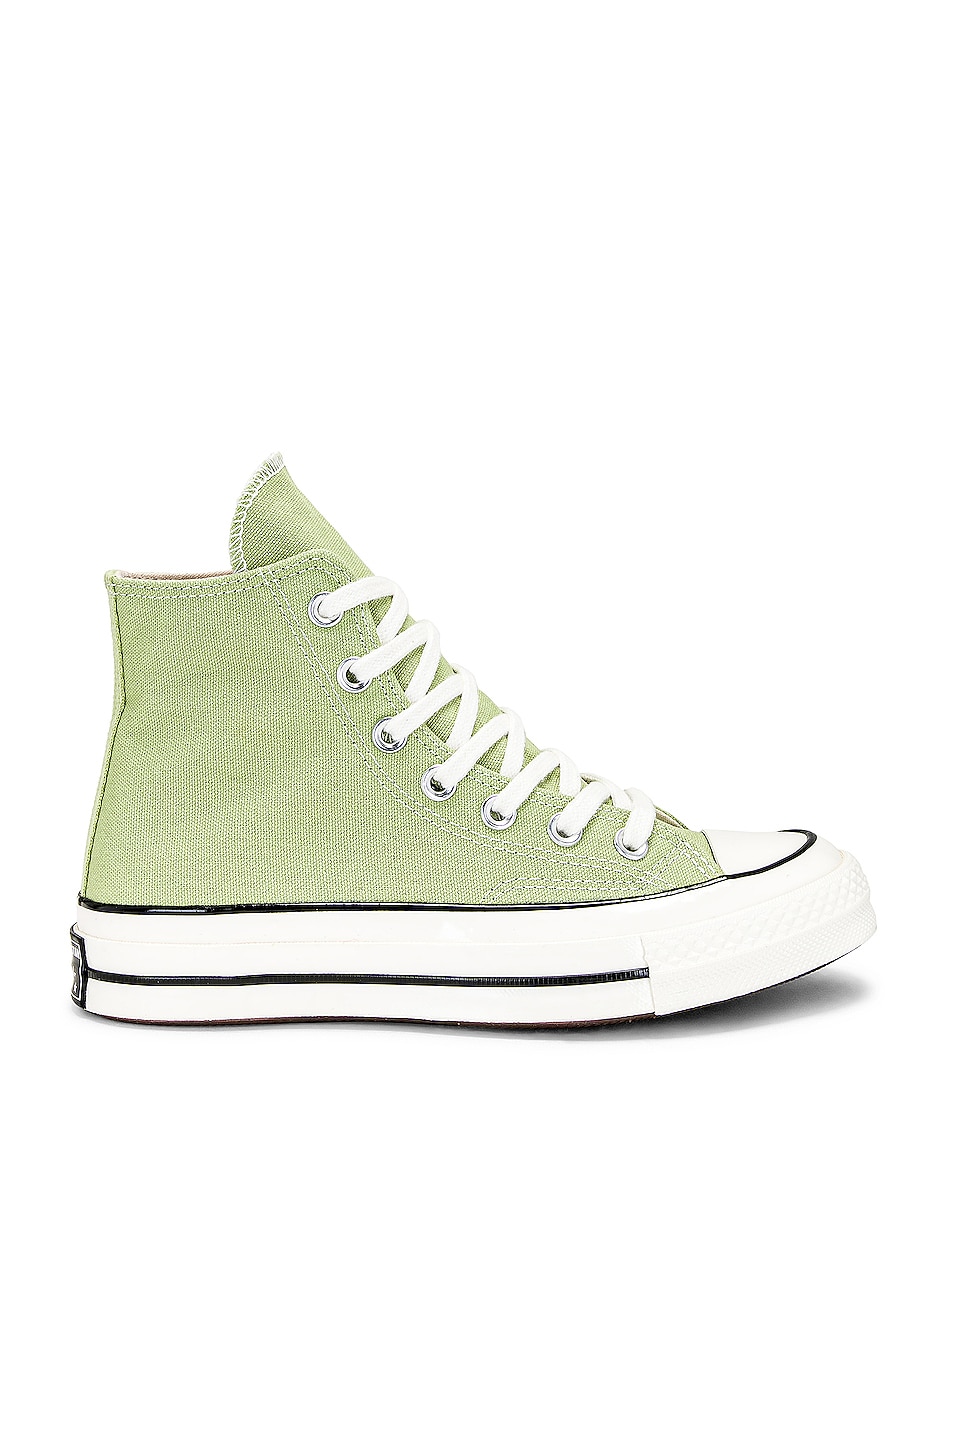 Image 1 of Converse Chuck 70 High Tops in Vitality Green, Egret, & Black